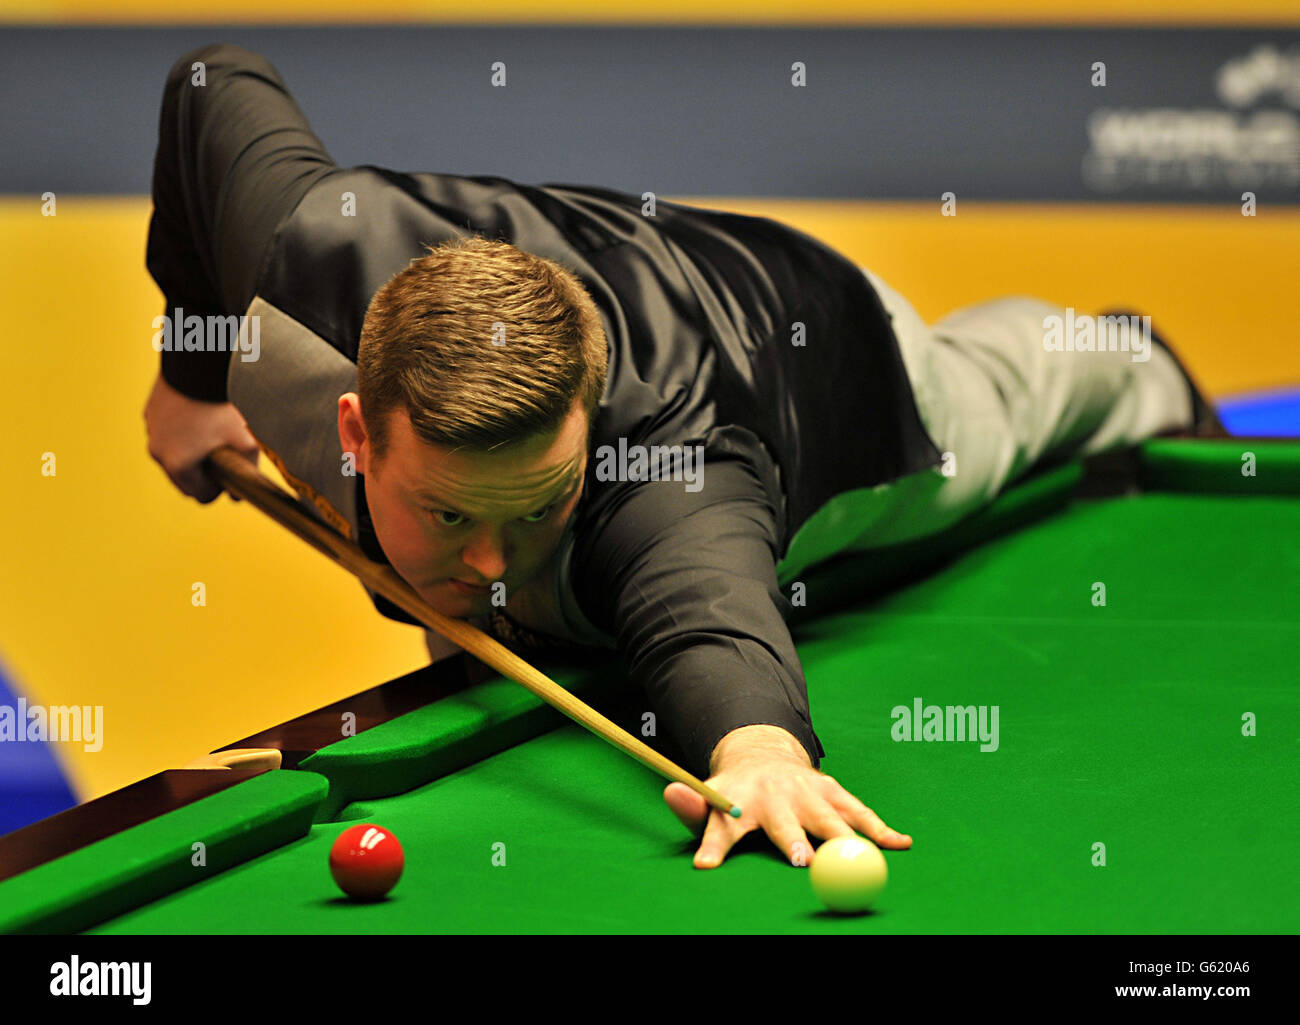 Snooker - Betfair World Championships - Day One - The Crucible. Shuan Murphy in action during his first round match against Martin Gould during the Betfair World Championships at the Crucible, Sheffield. Stock Photo